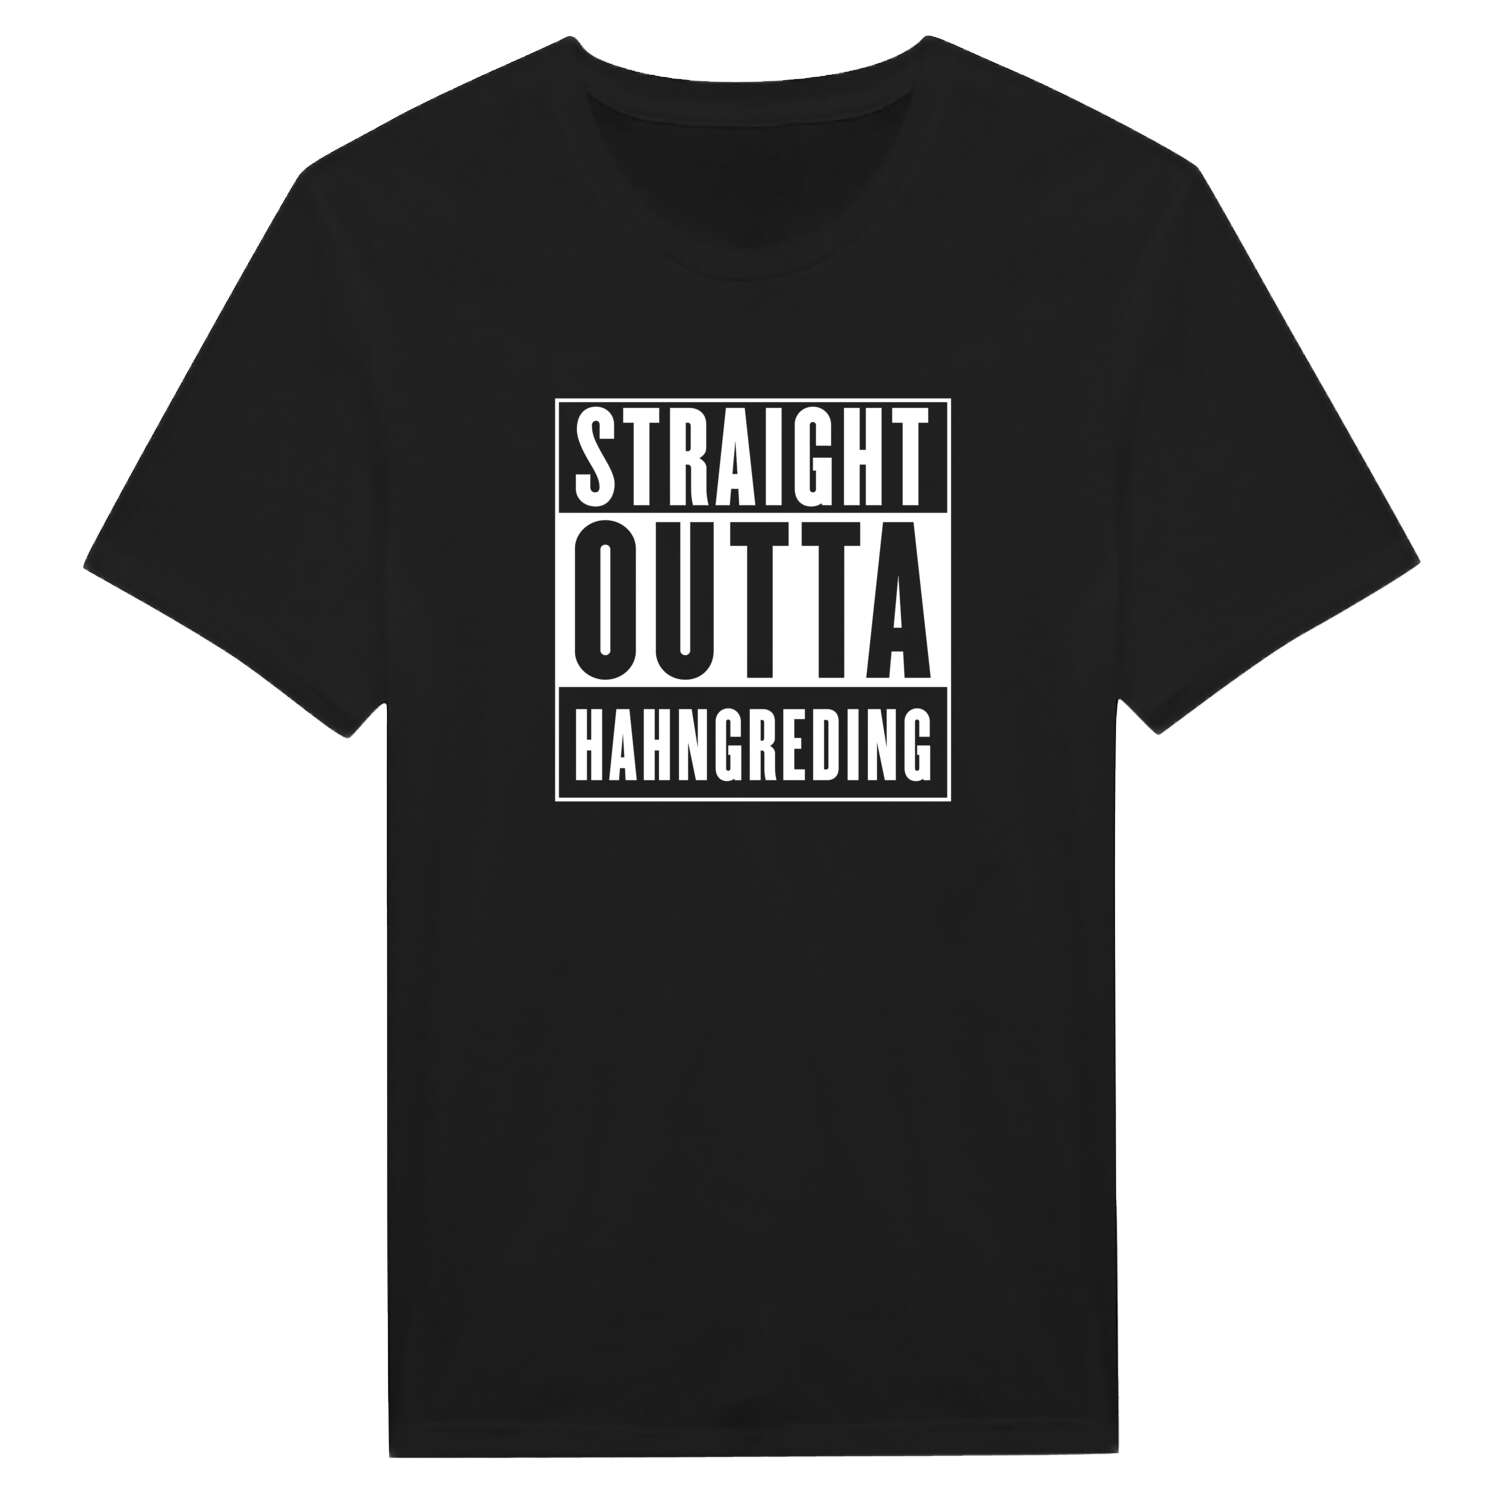 Hahngreding T-Shirt »Straight Outta«